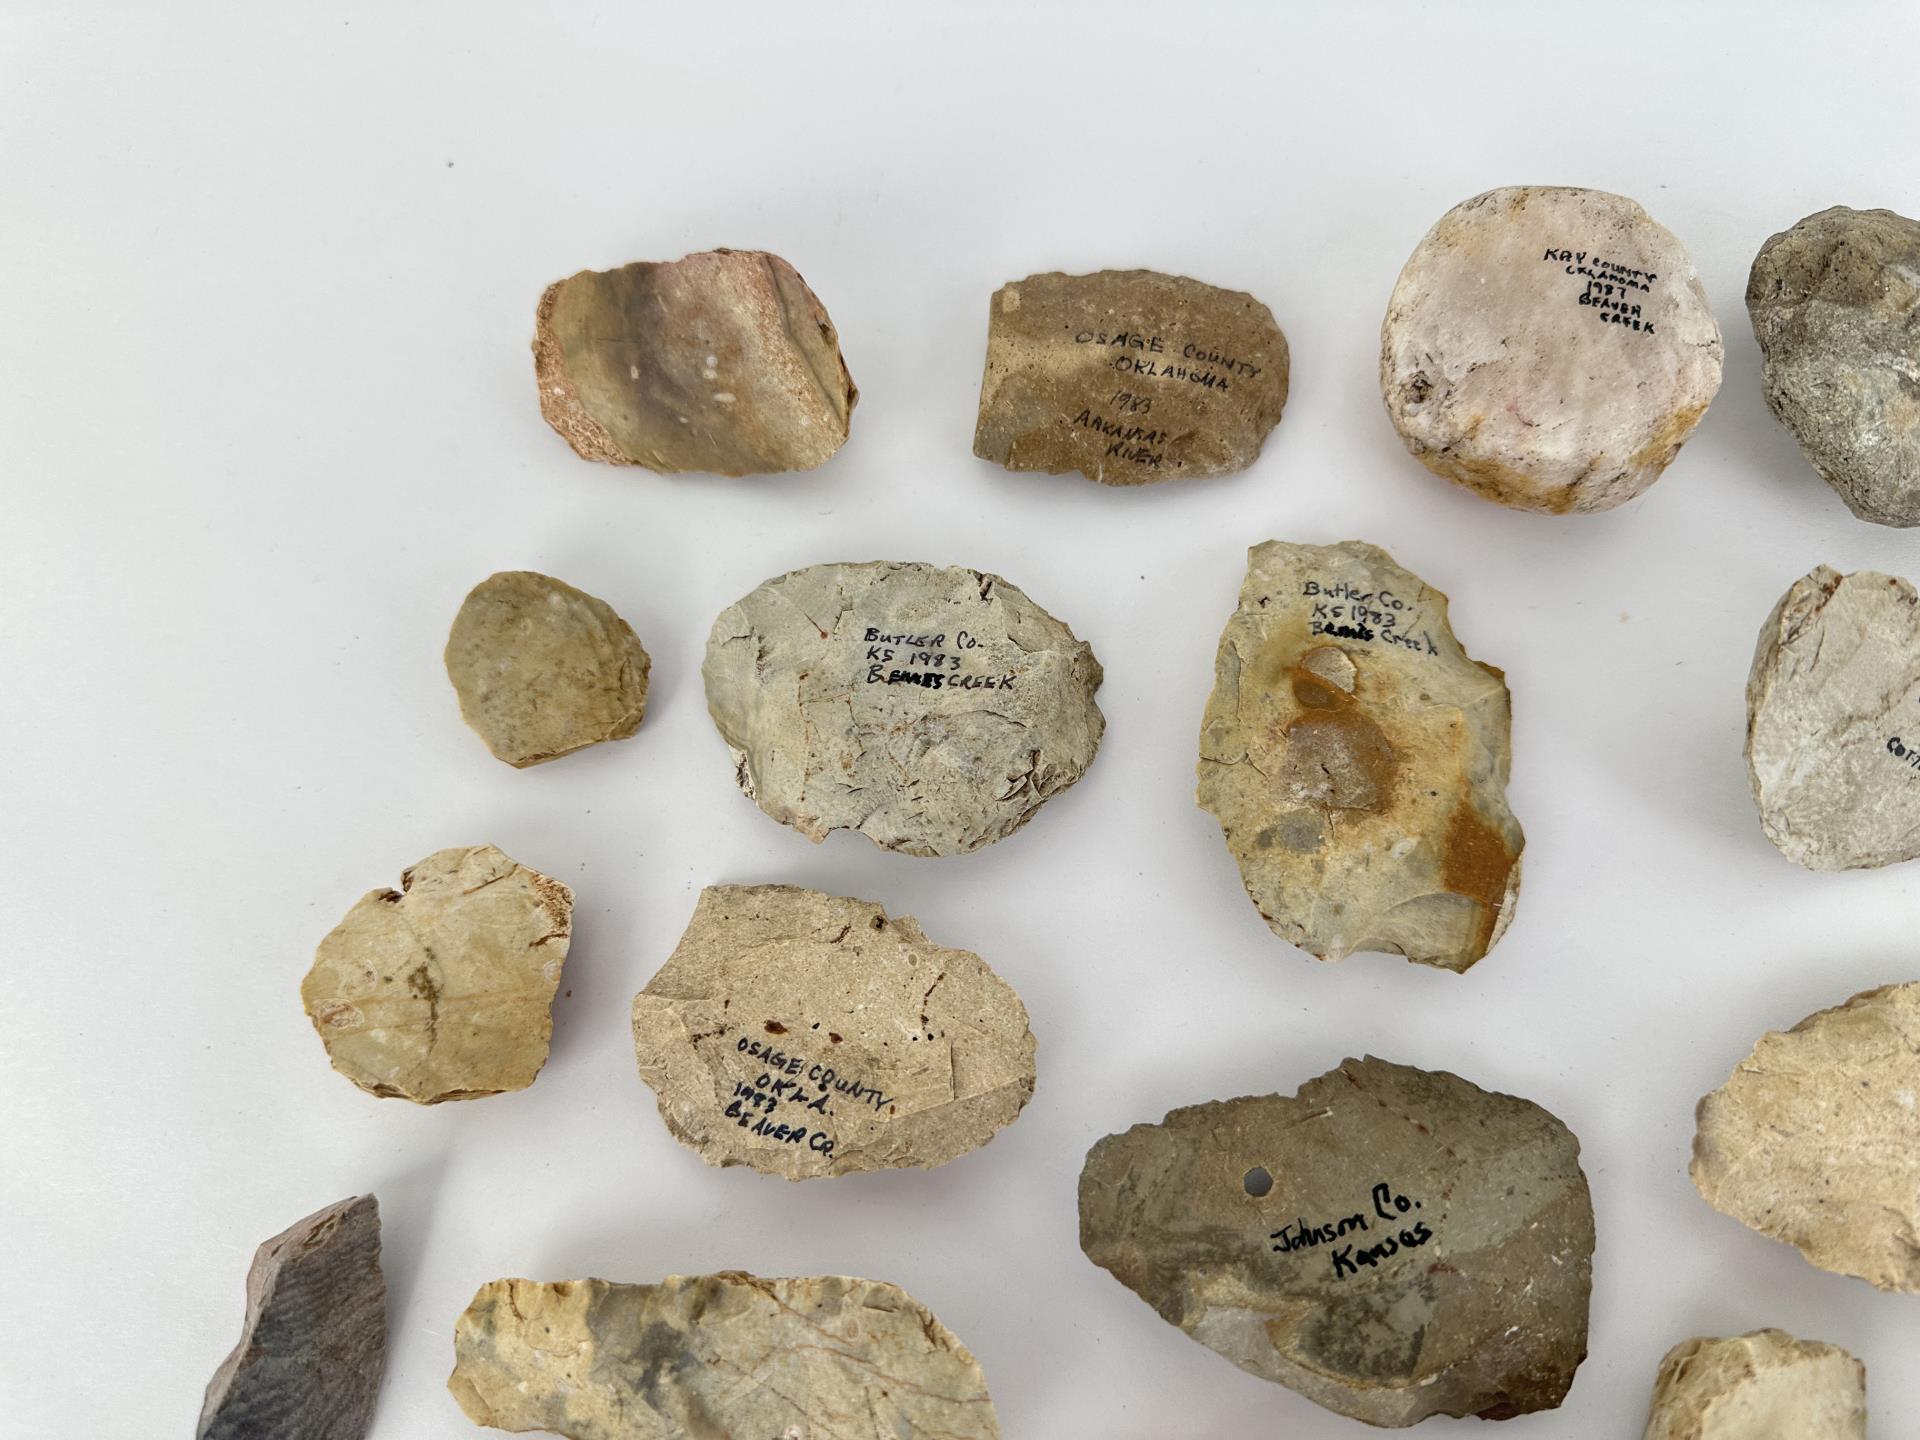 Ancient Native American Indian Stone Tools